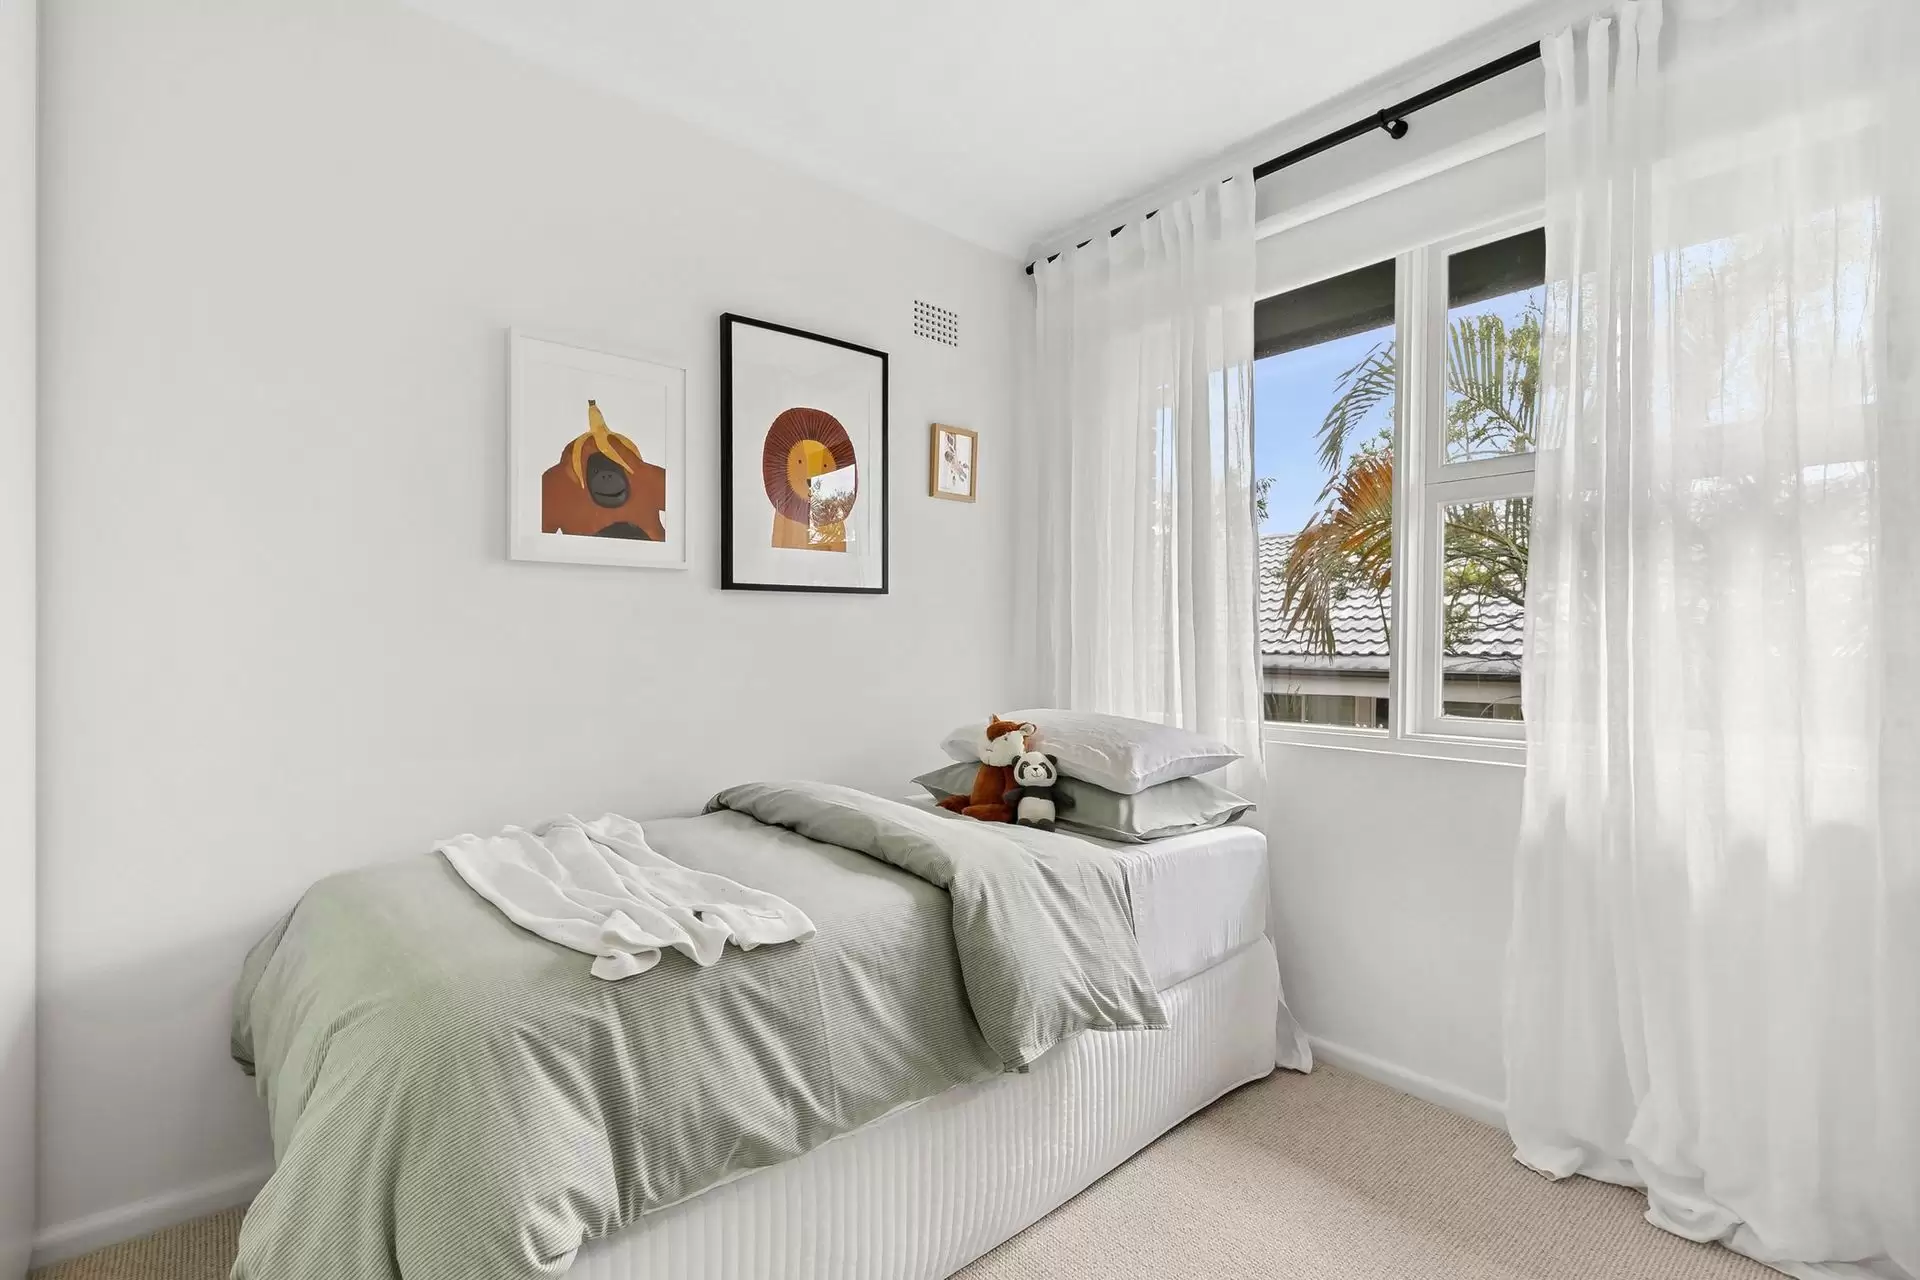 Mosman Leased by Shead Property - image 1